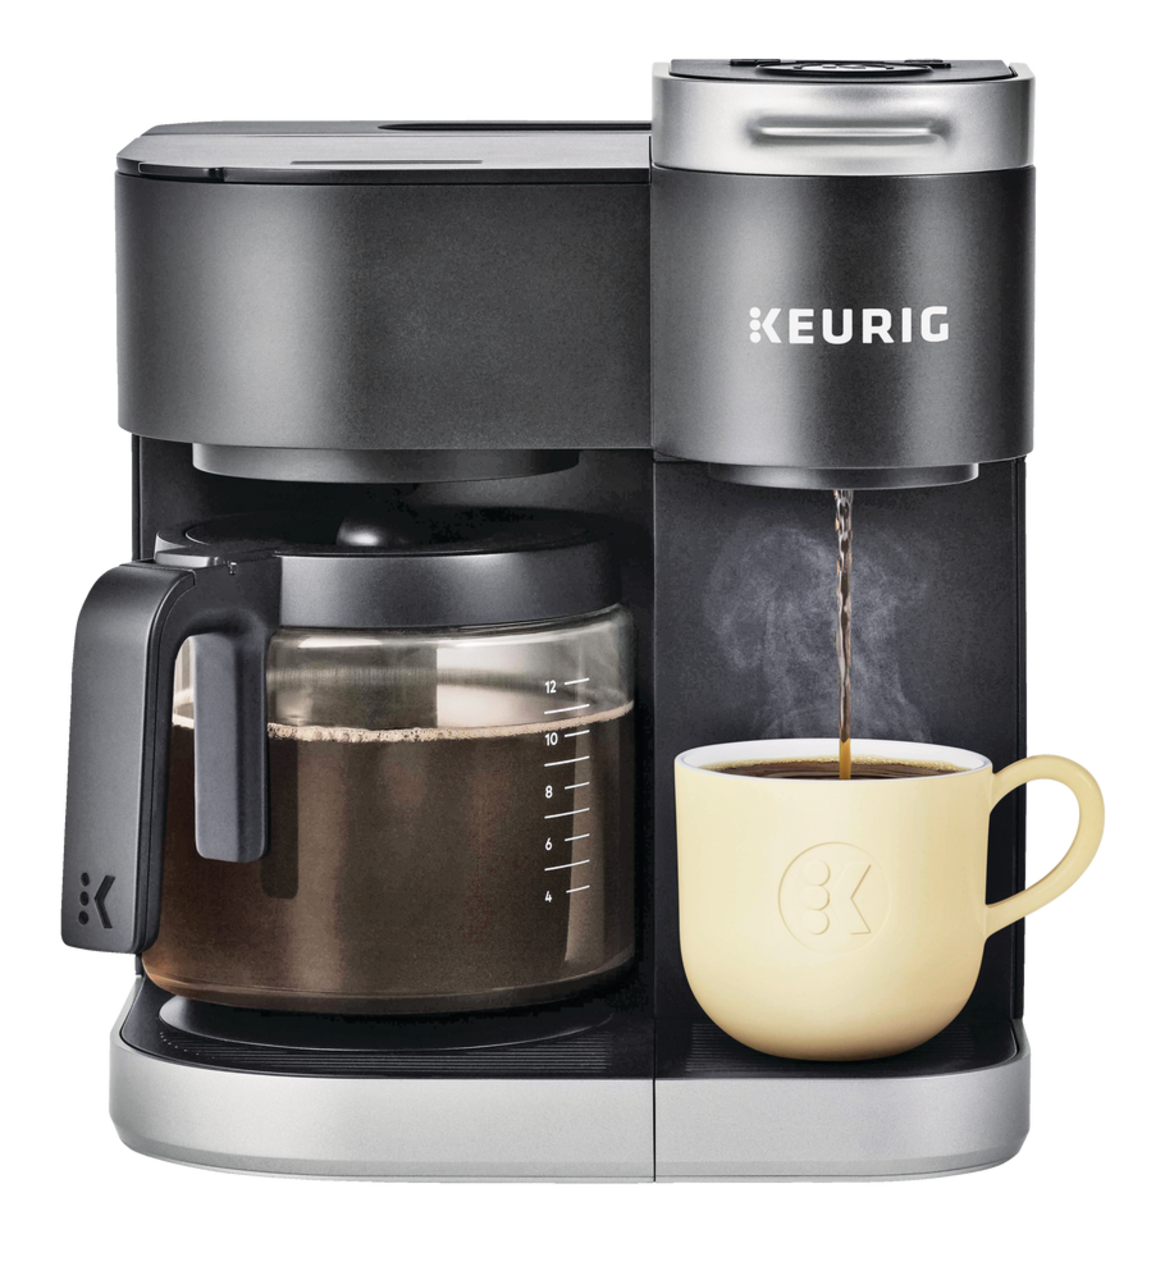 https://media-www.canadiantire.ca/product/living/kitchen/kitchen-appliances/0432718/keurig-k-duo-d51931b9-3998-44b5-81b6-7a023def0893.png?imdensity=1&imwidth=1244&impolicy=mZoom